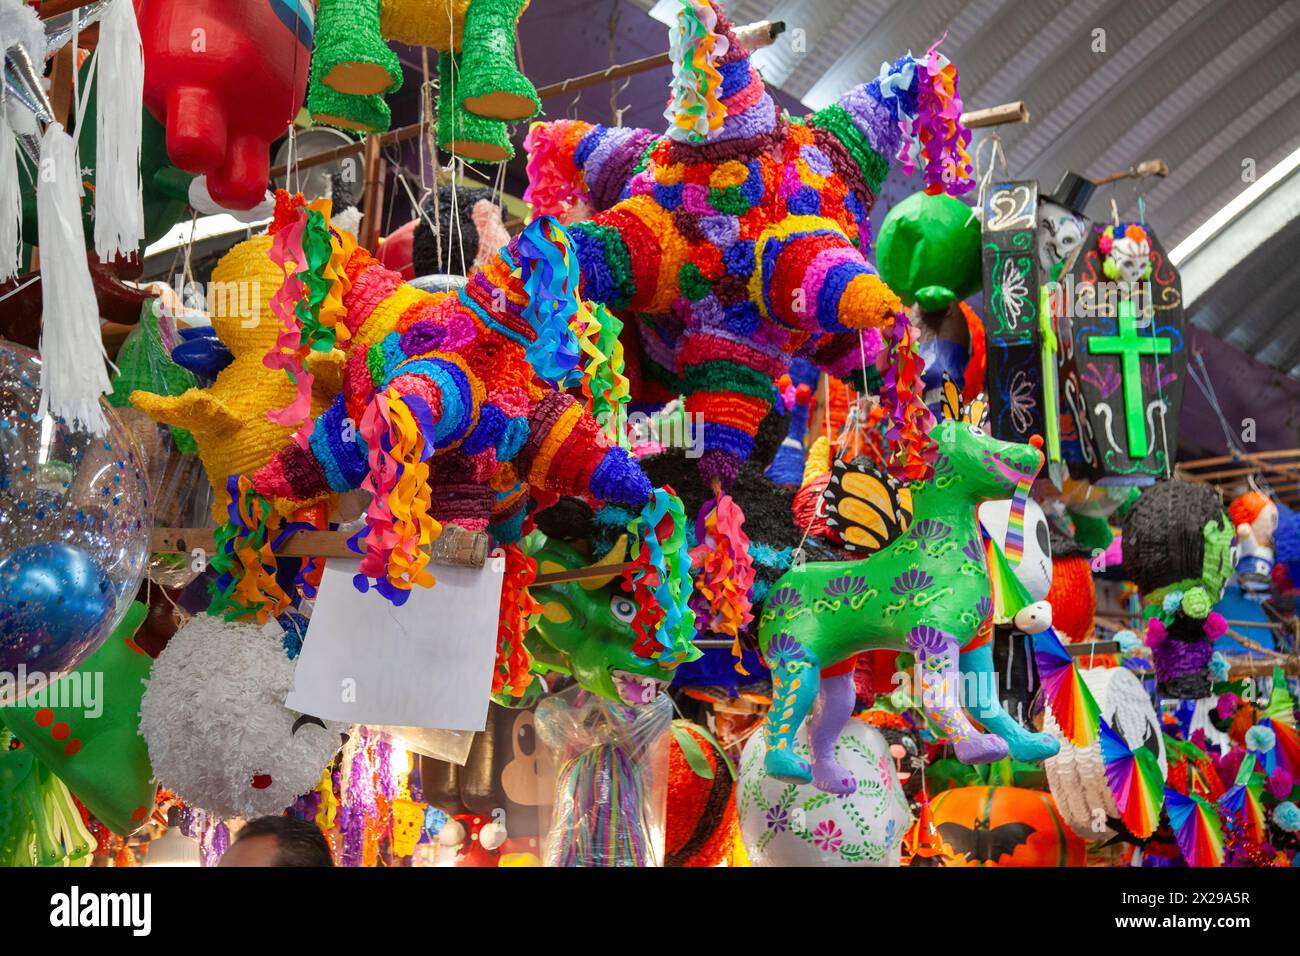 Pinata Dolls and Festive Merchandise for Sale at Jamaica Market in mexico City, Mexico Stock Photo